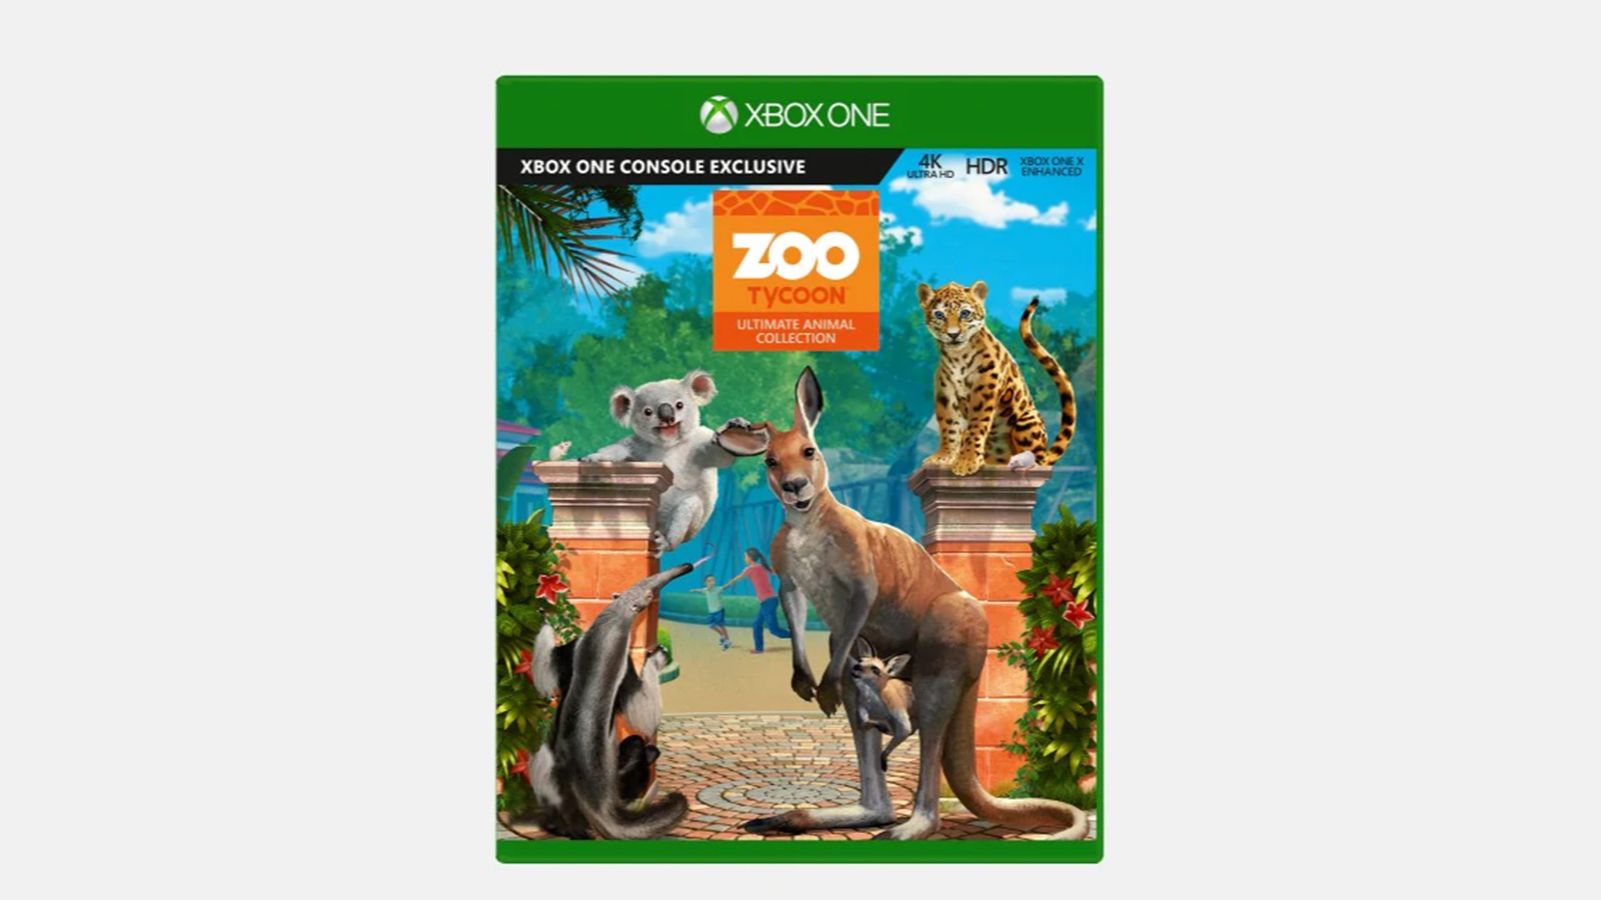 Create your very own zoo with nearly 200 kinds of animals. <strong>Zoo Tycoon: Ultimate Animal Collection ($14.99, originally $29.99; </strong><a href="https://click.linksynergy.com/deeplink?id=Fr/49/7rhGg&mid=24542&u1=0607xboxe32019&murl=https%3A%2F%2Fwww.microsoft.com%2Fen-us%2Fp%2Fzoo-tycoon-ultimate-animal-collection-for-xbox-one%2F92rq643b42k9%3Fcid%3Dmsft_web_collection%26activetab%3Dpivot%253aoverviewtab" target="_blank" target="_blank"><strong>microsoft.com</strong></a><strong>)</strong><br />